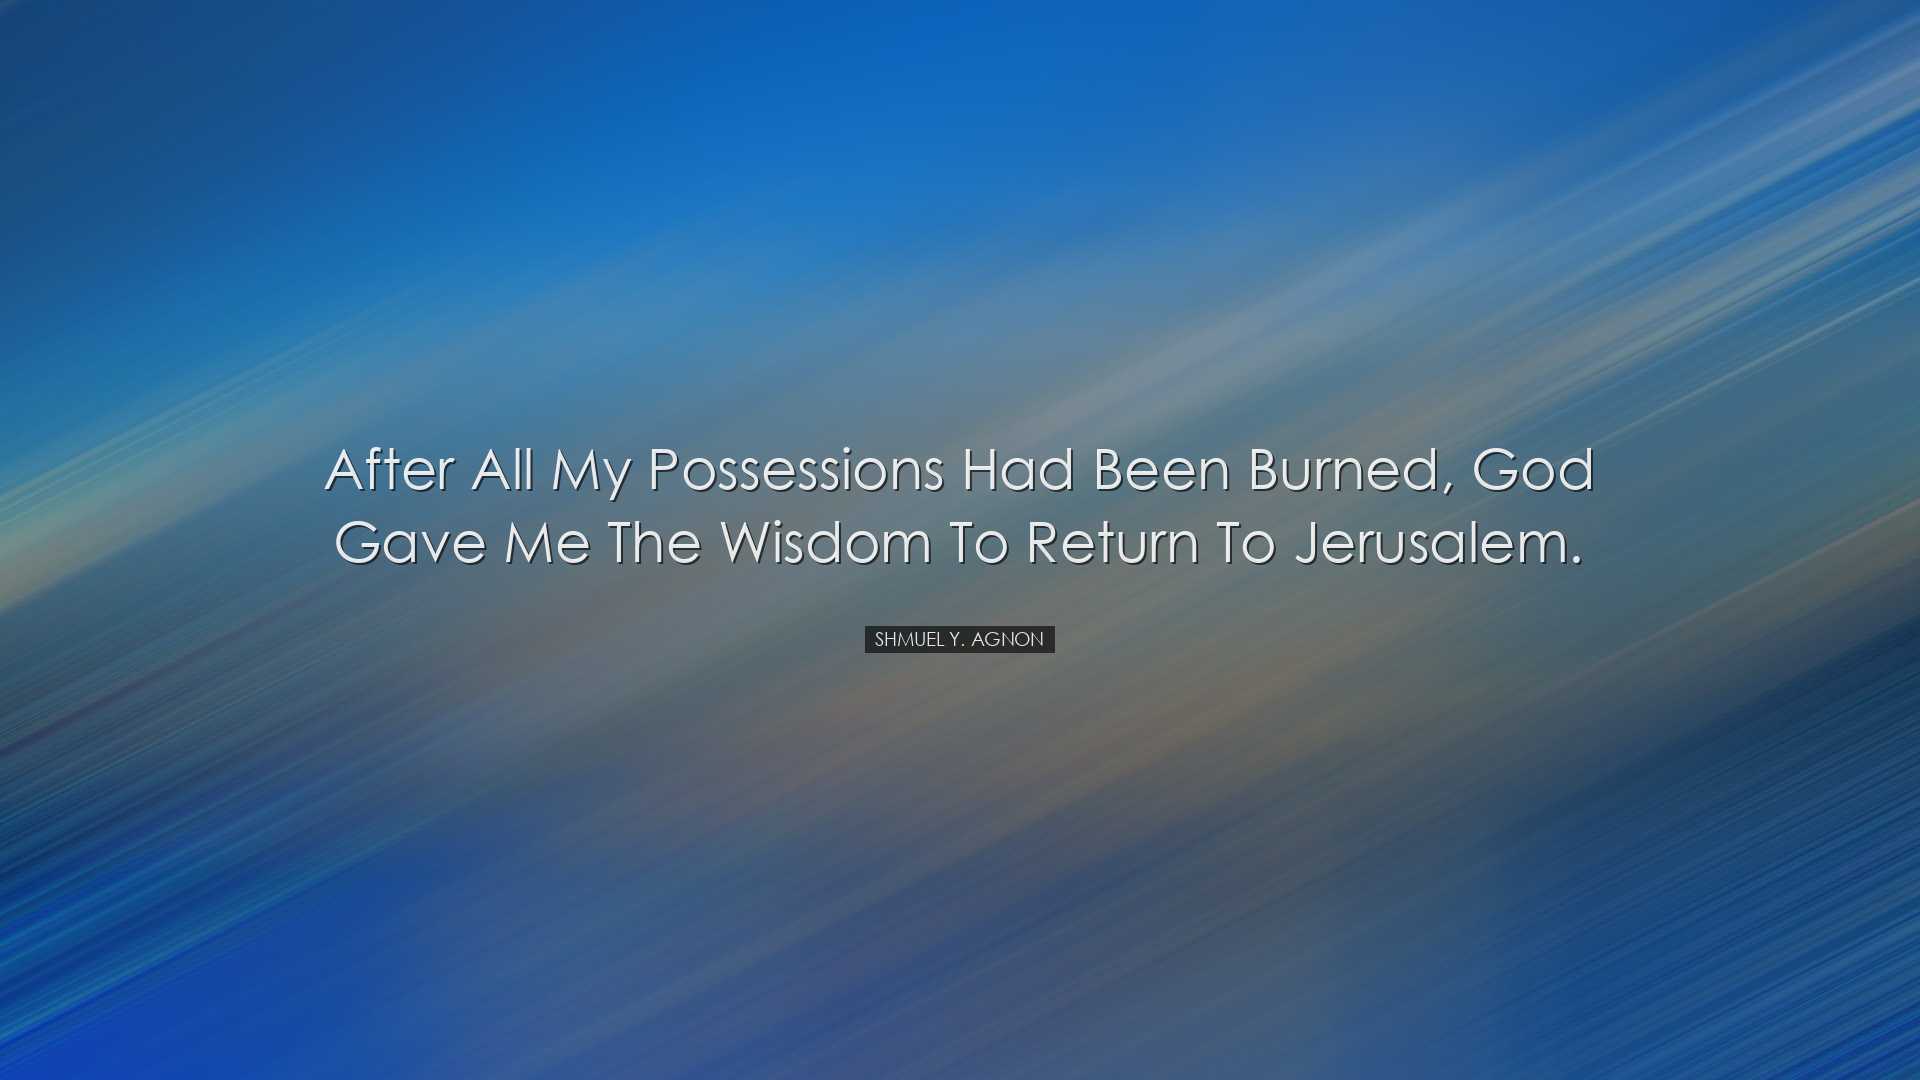 After all my possessions had been burned, God gave me the wisdom t